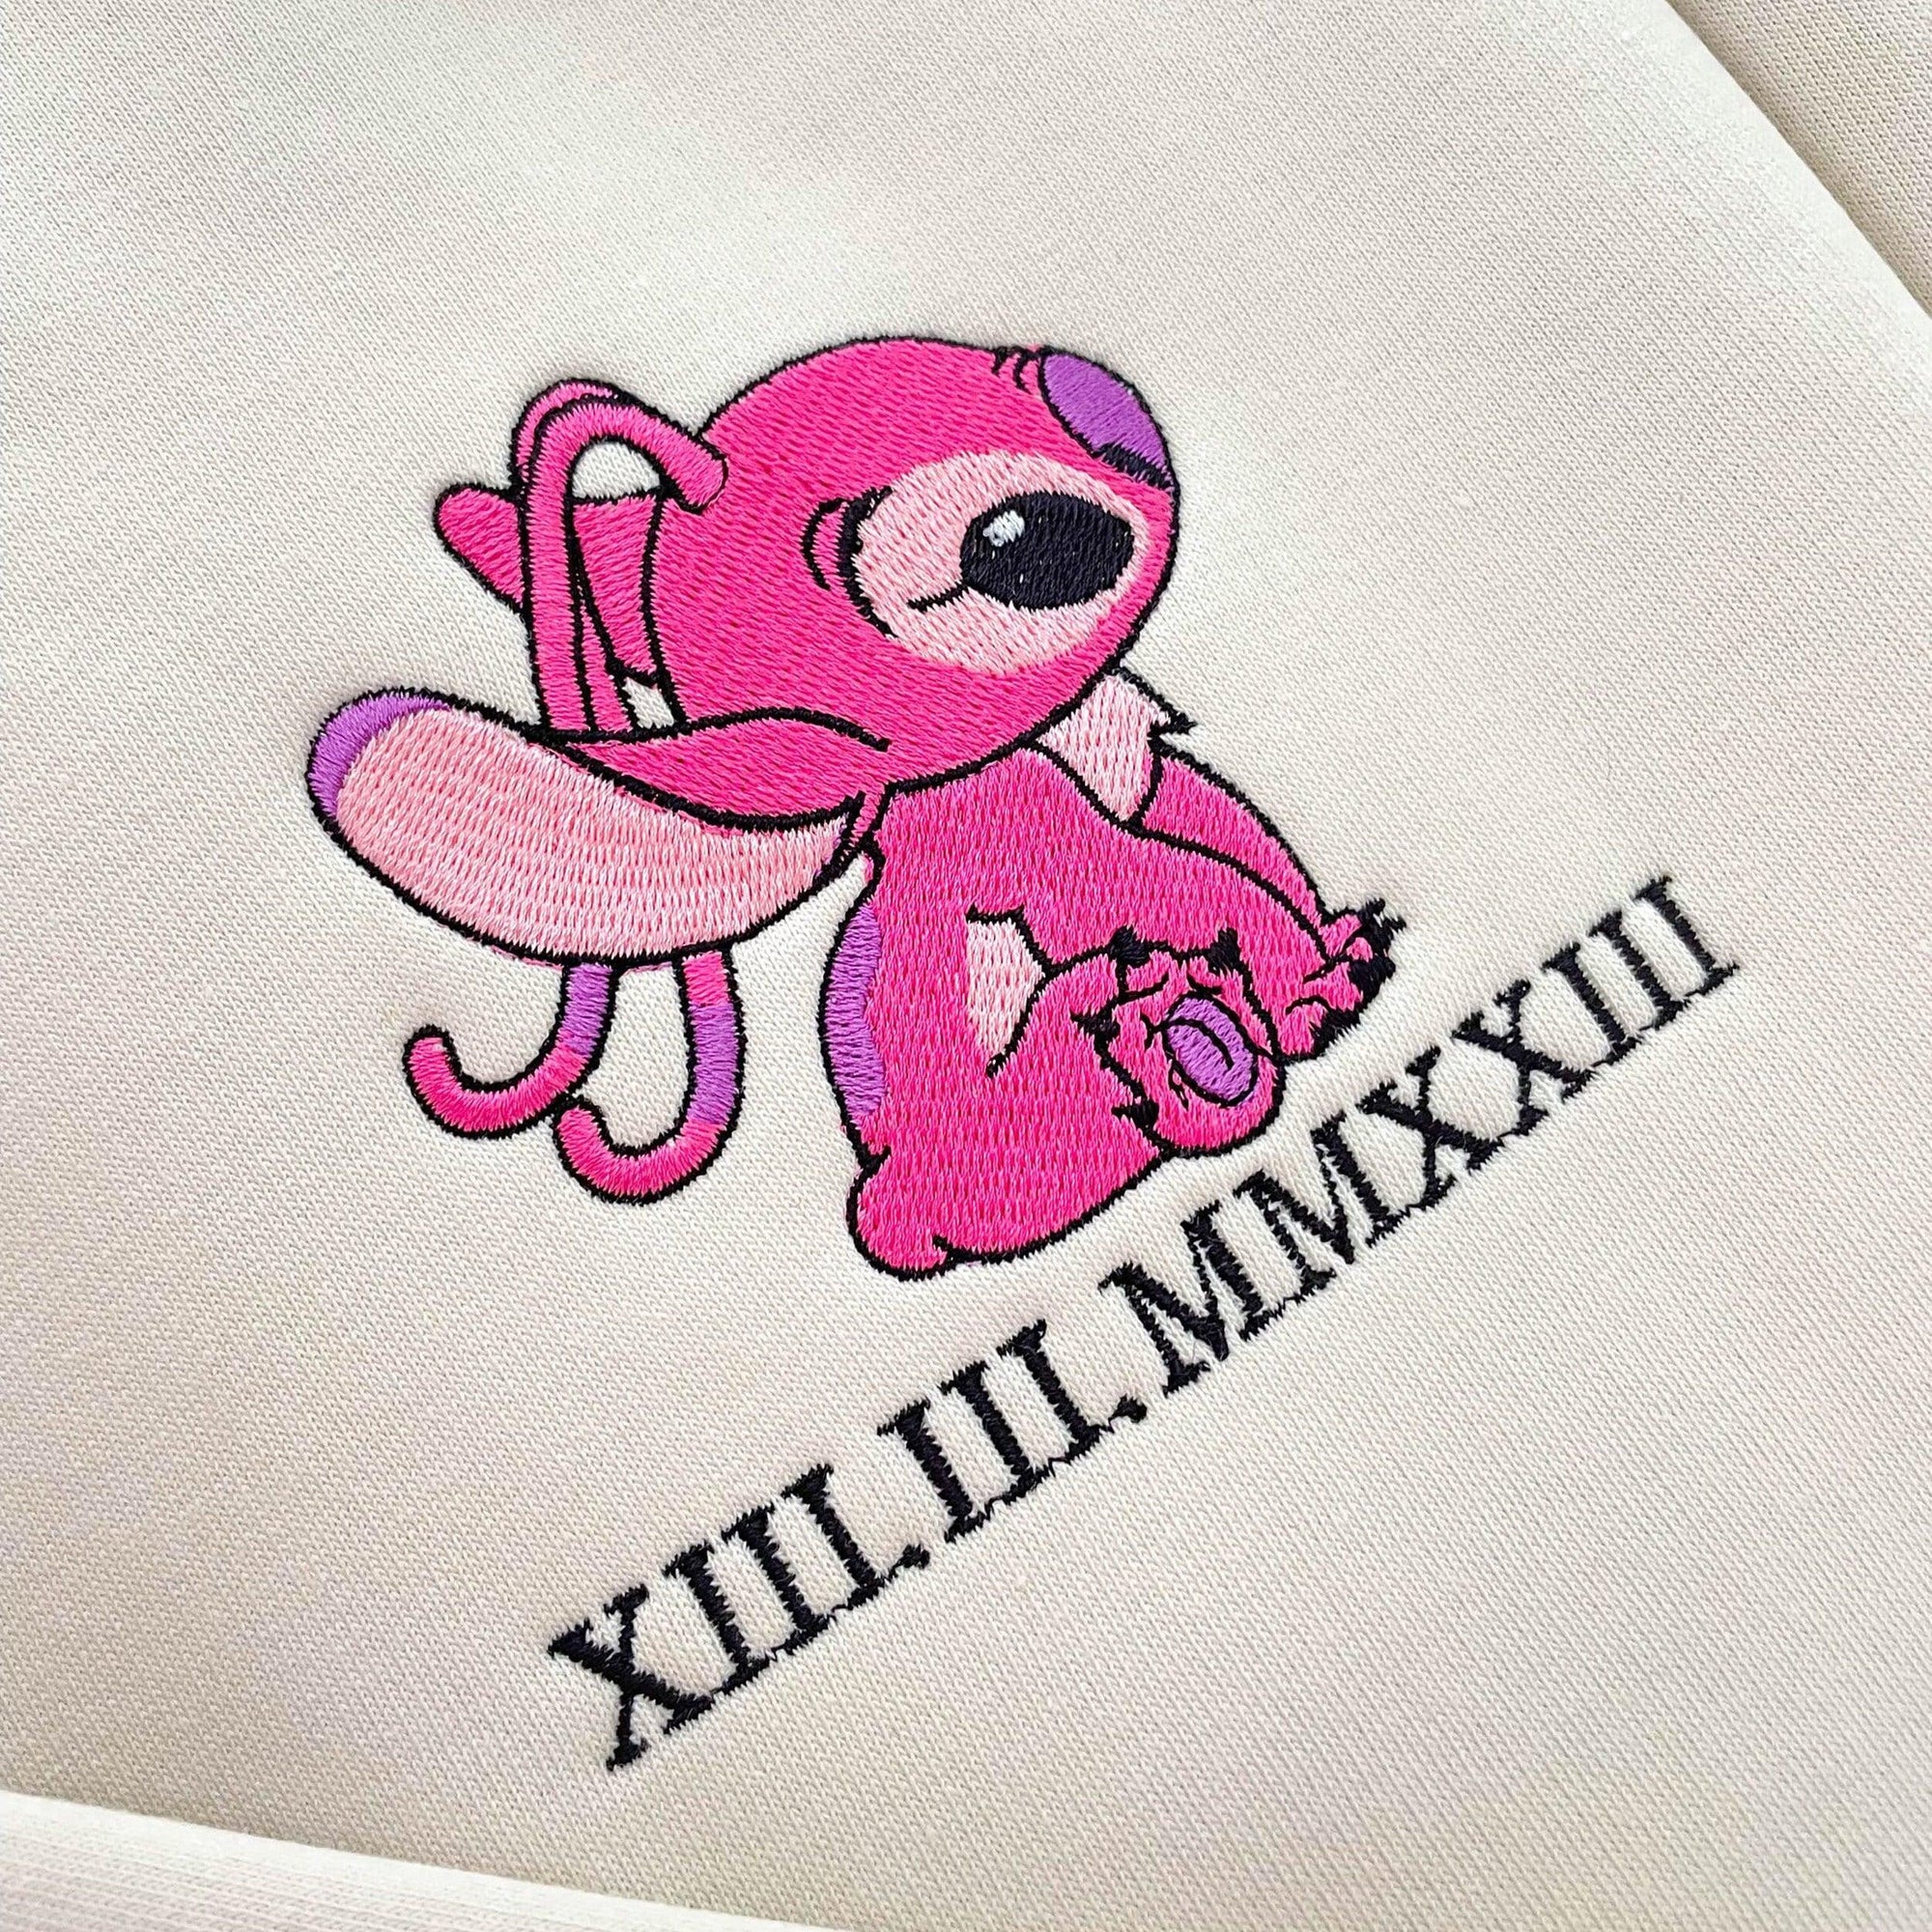 Custom Embroidered Hoodies For Couples, Custom Matching Couple Hoodies, Stitch Couples Roman Numeral Date Embroidered Hoodie